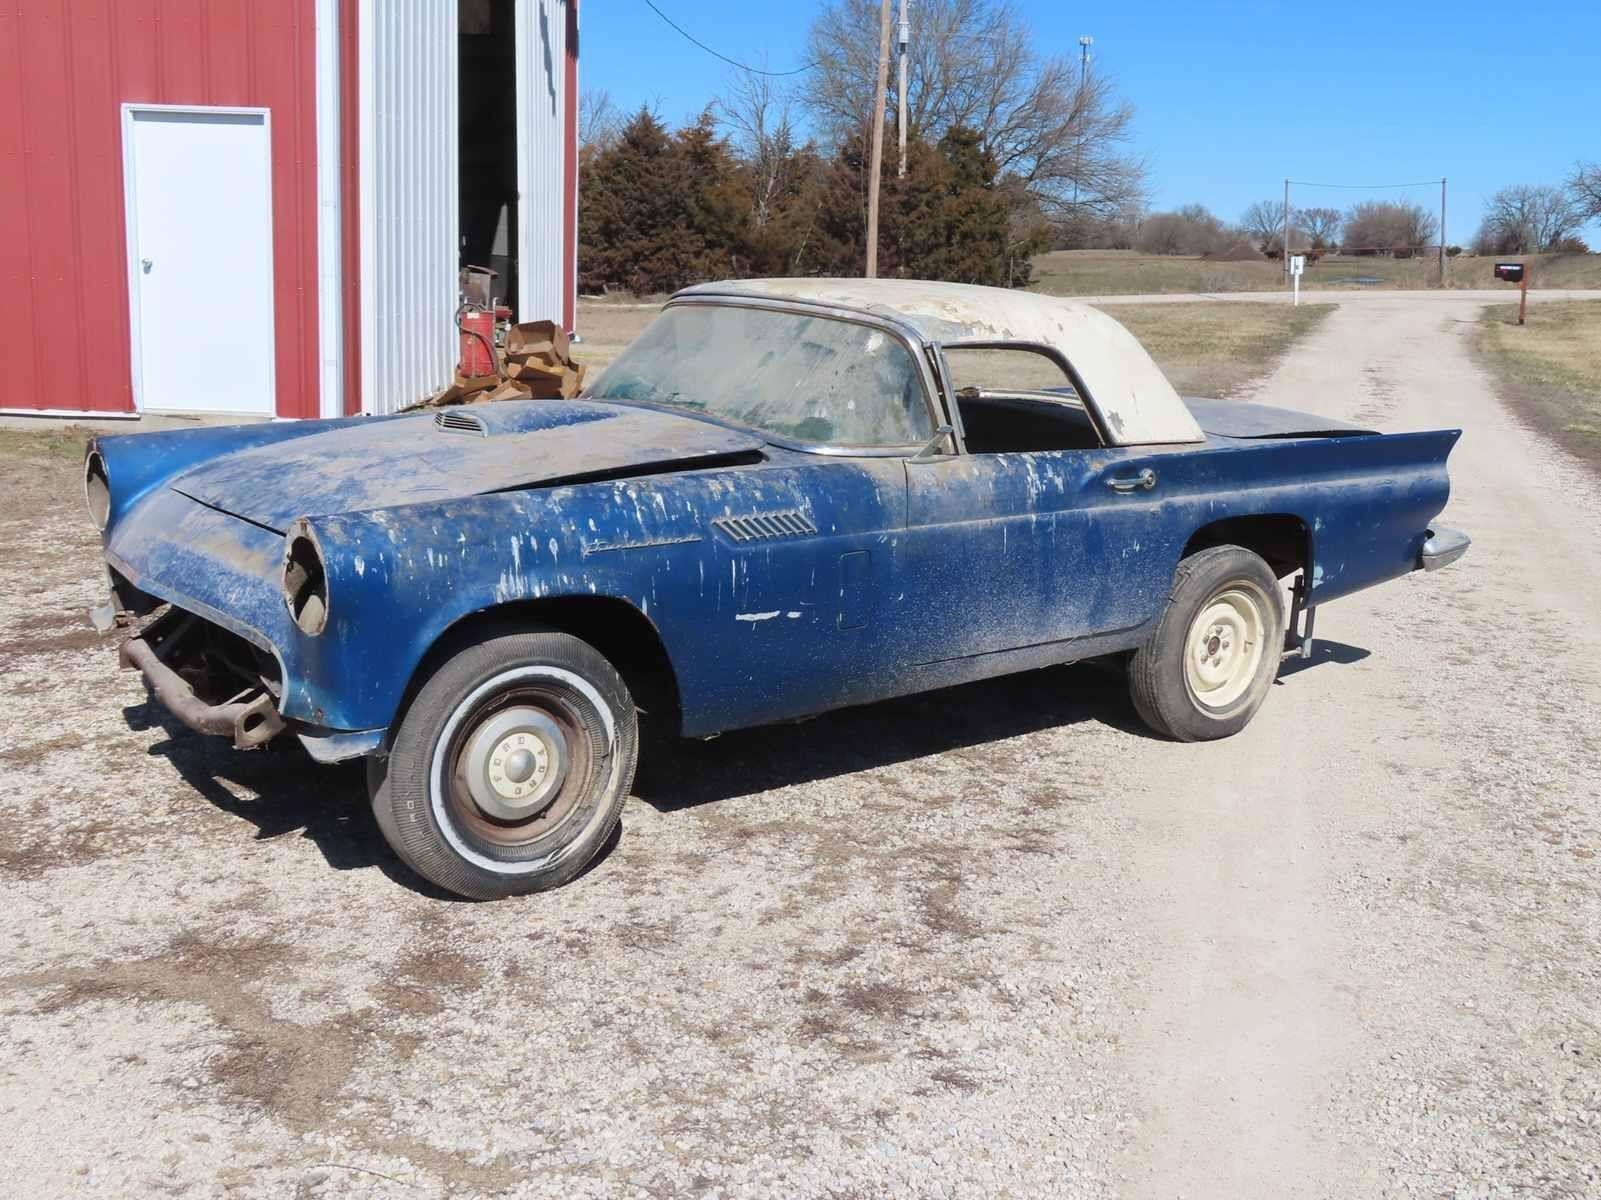 MORE UPDATED PHOTOS: 1957 Ford Thunderbird